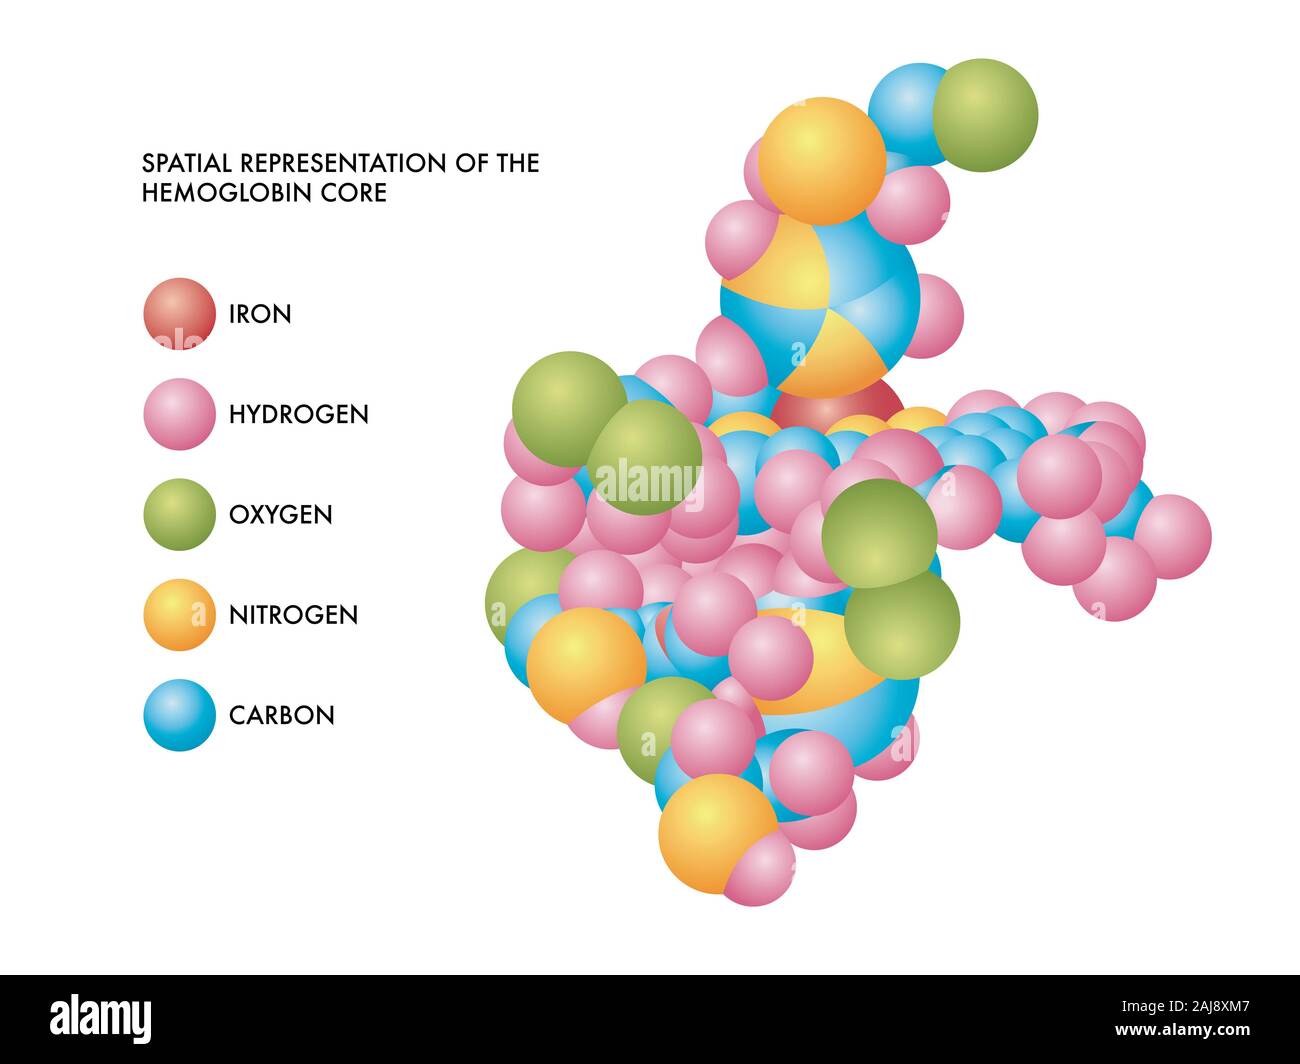 Medical illustration of hemoglobin core spatial representation with molecules of iron, hydrogen, oxygen, nitrogen and carbon in color coded shapes. Stock Photo